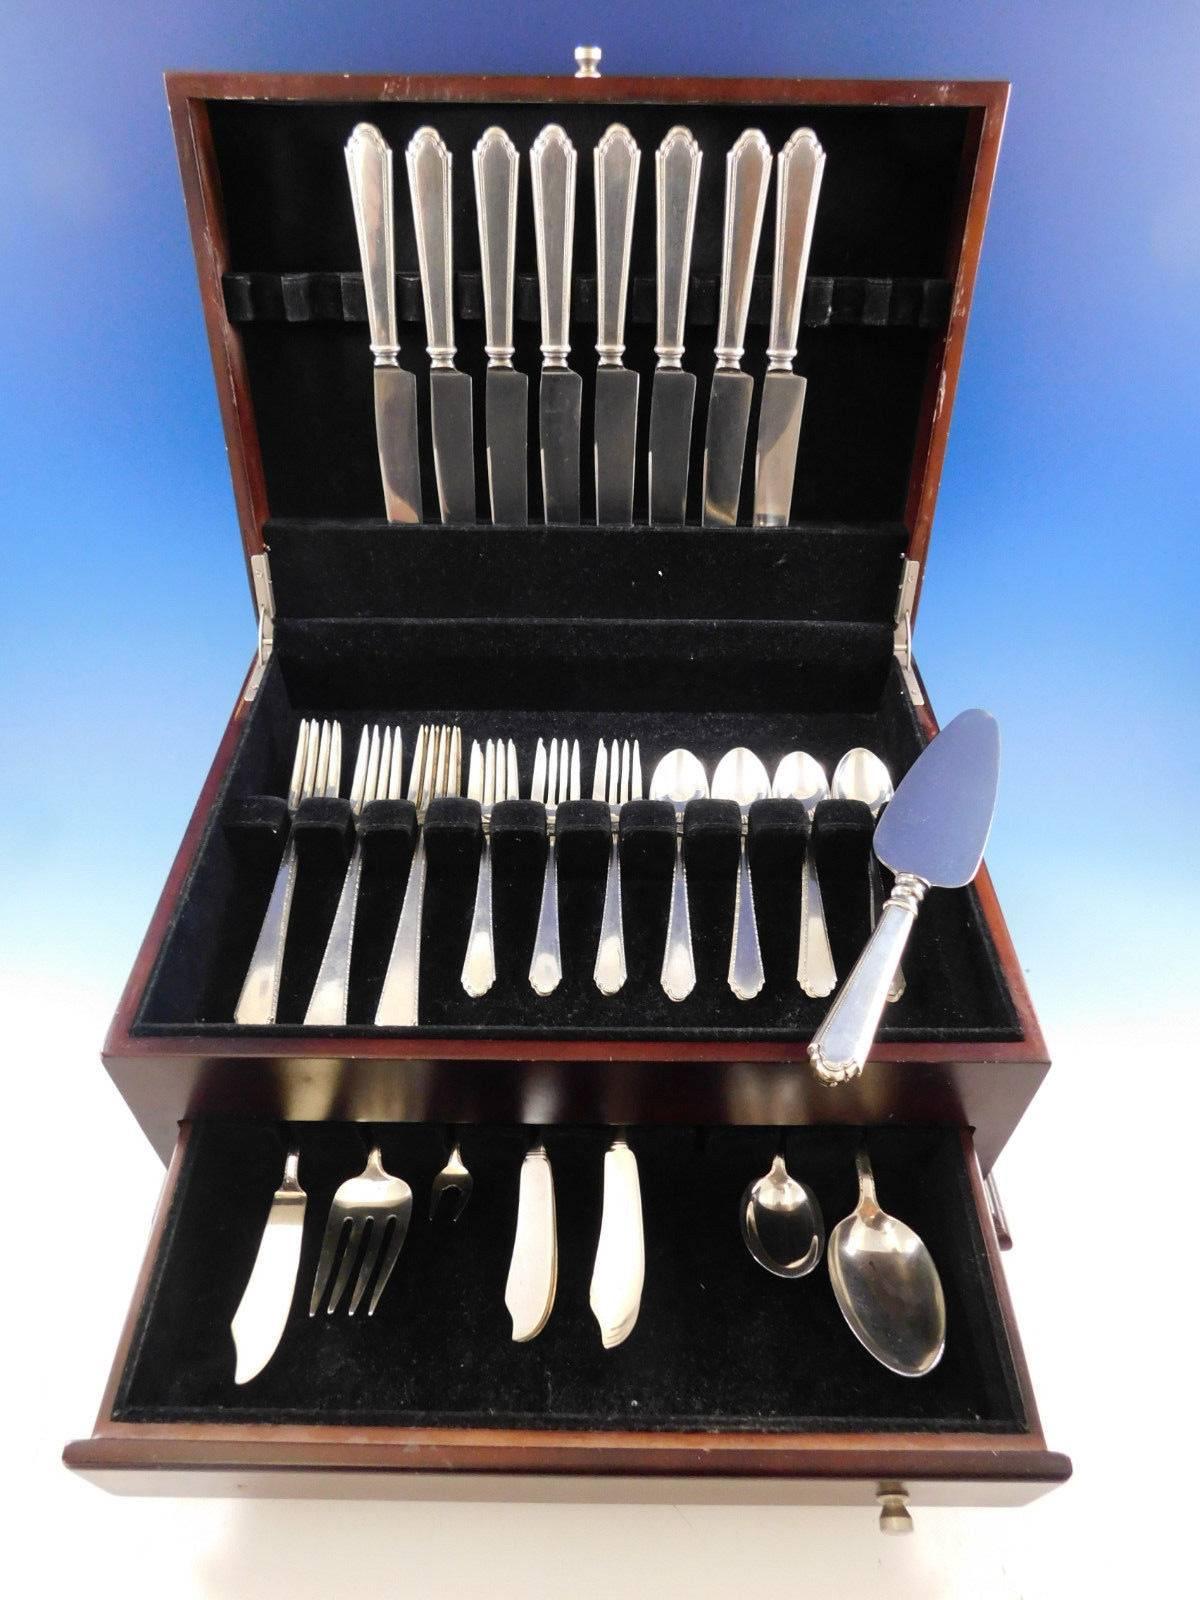 Dinner Size William & Mary by Lunt sterling silver Flatware set, 46 pieces. This set includes: 

8 Dinner Size Knives, 9 3/4